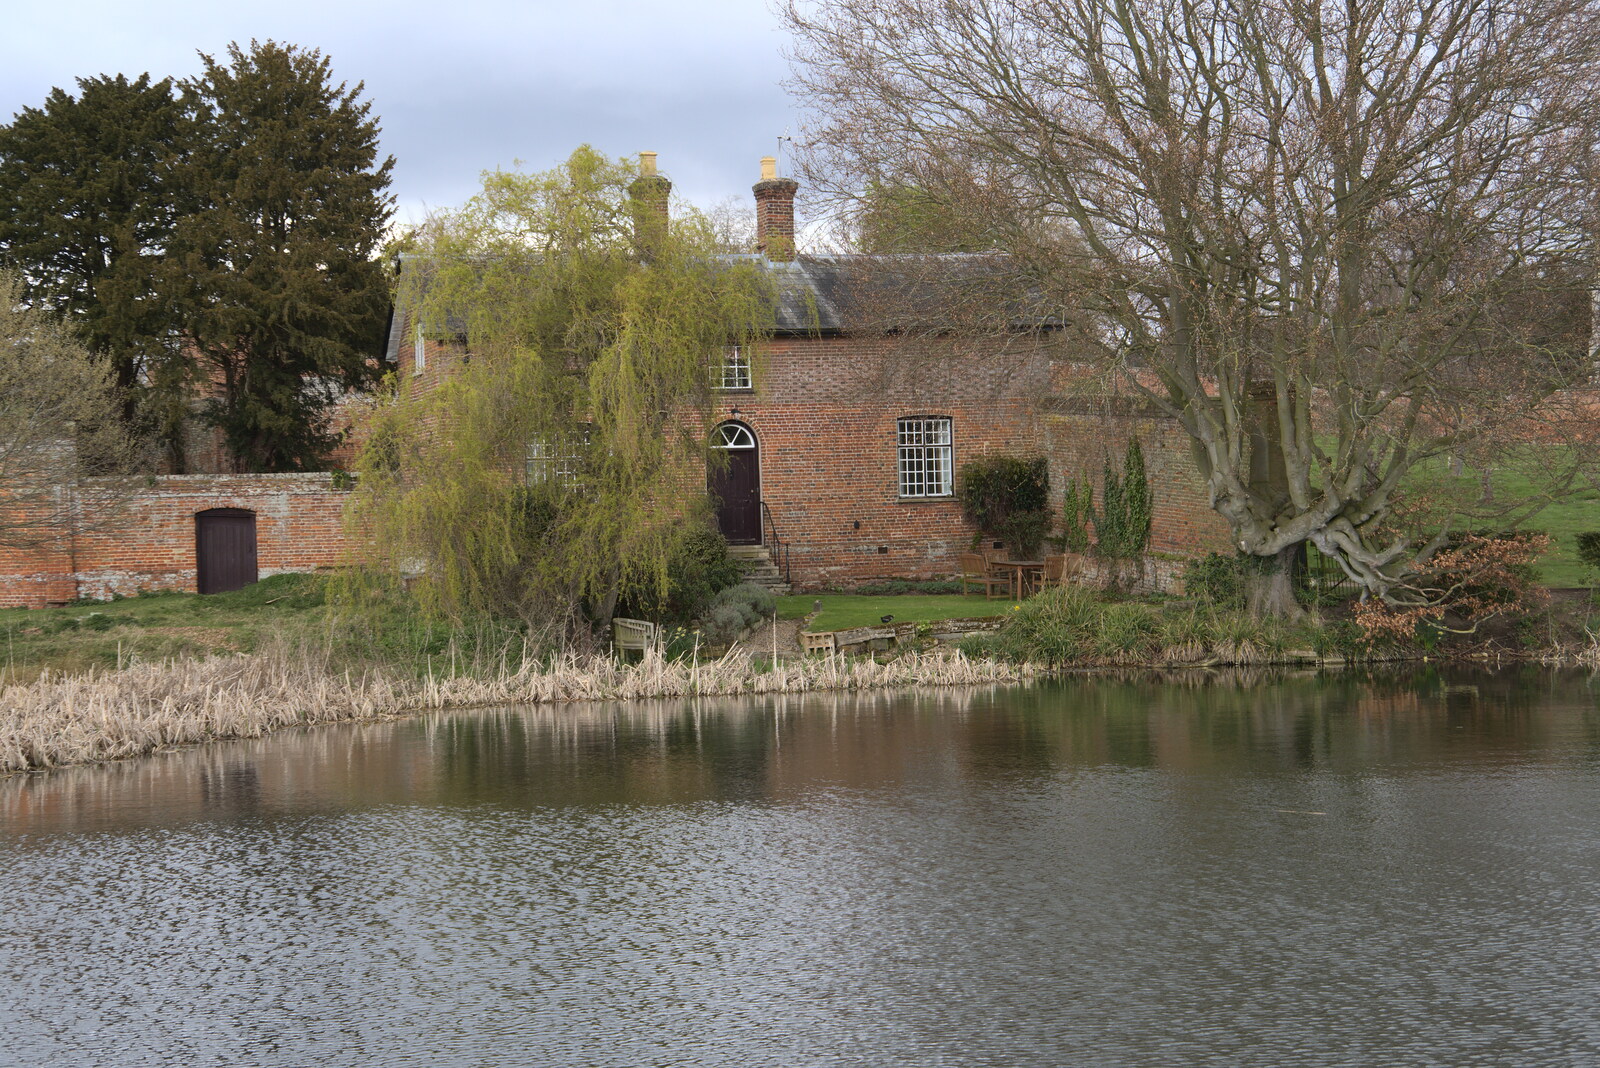 A private house by the lake from A Return to Ickworth House, Horringer, Suffolk - 11th April 2021